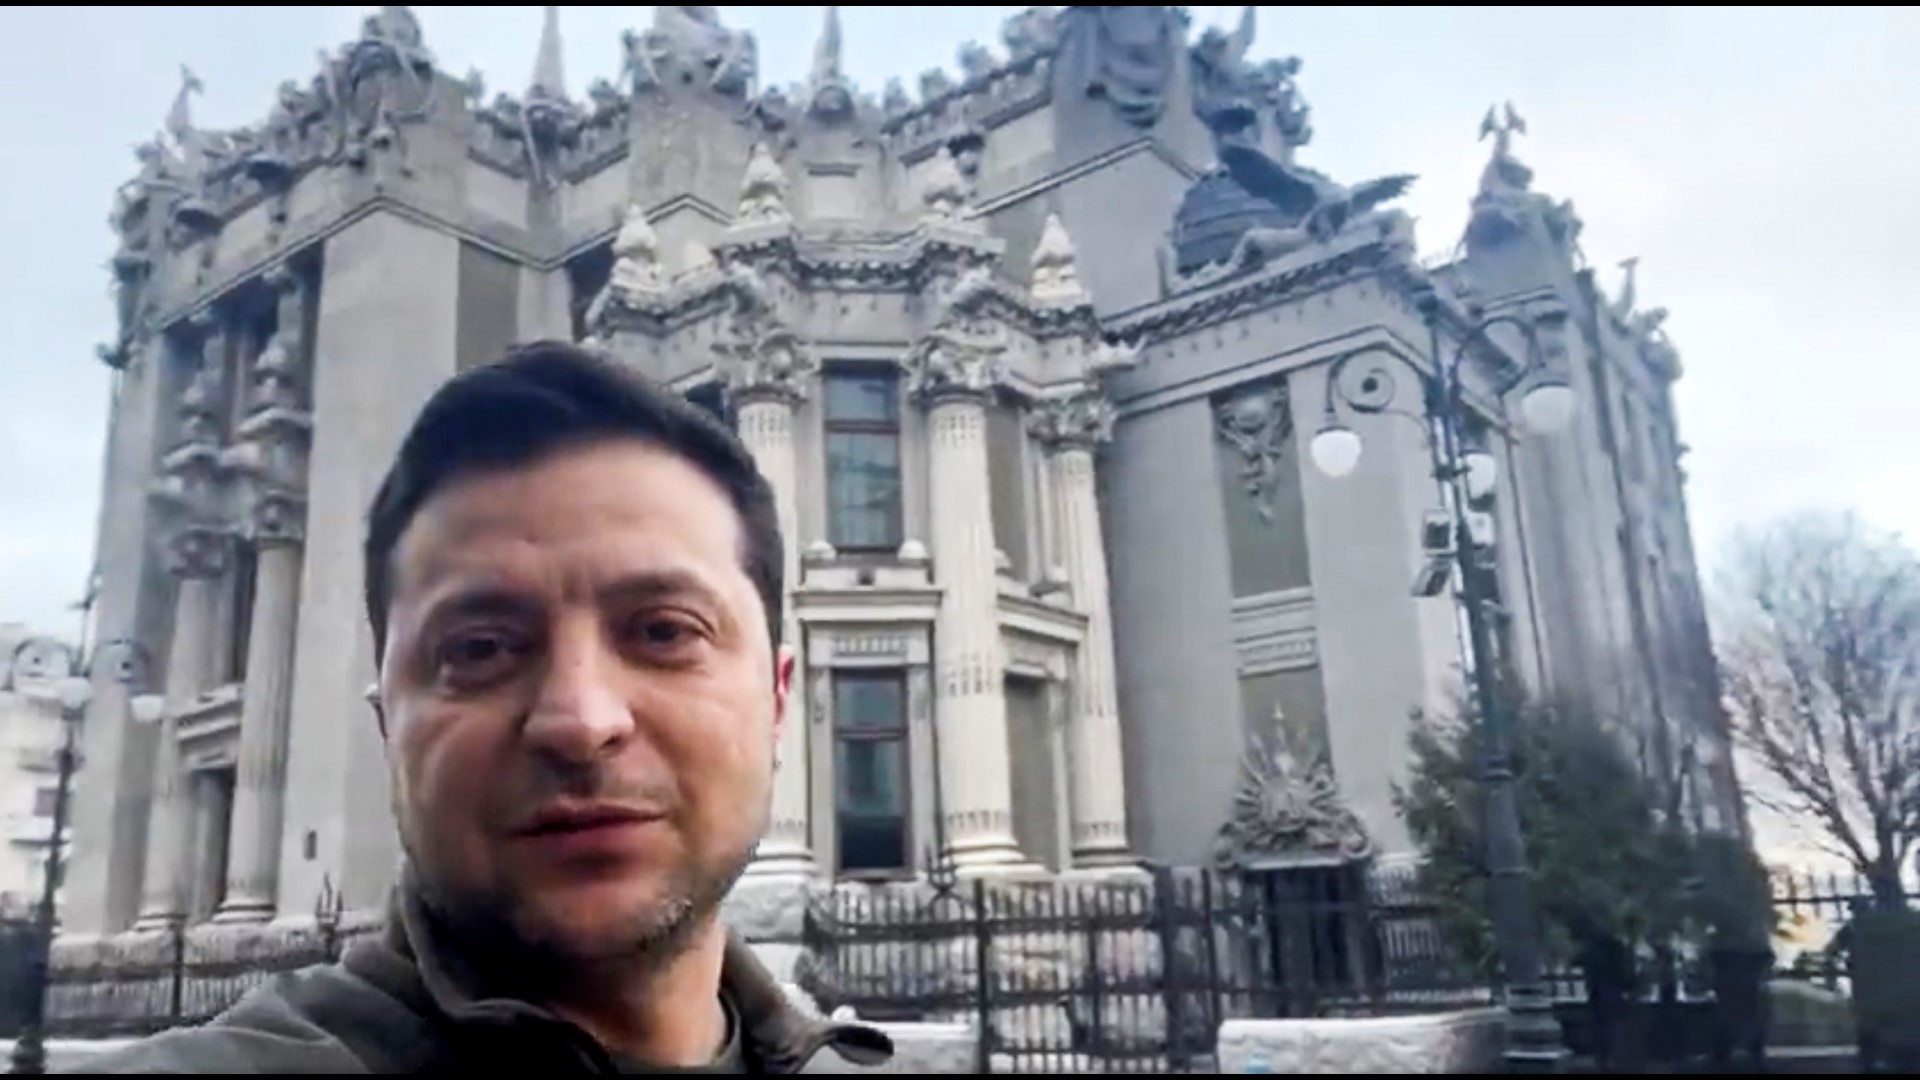 Ukraine president Volodymyr Zelenskyy posted a video from Kyiv Saturday urging residents not to believe fake reports about the Ukrainian army's surrender.